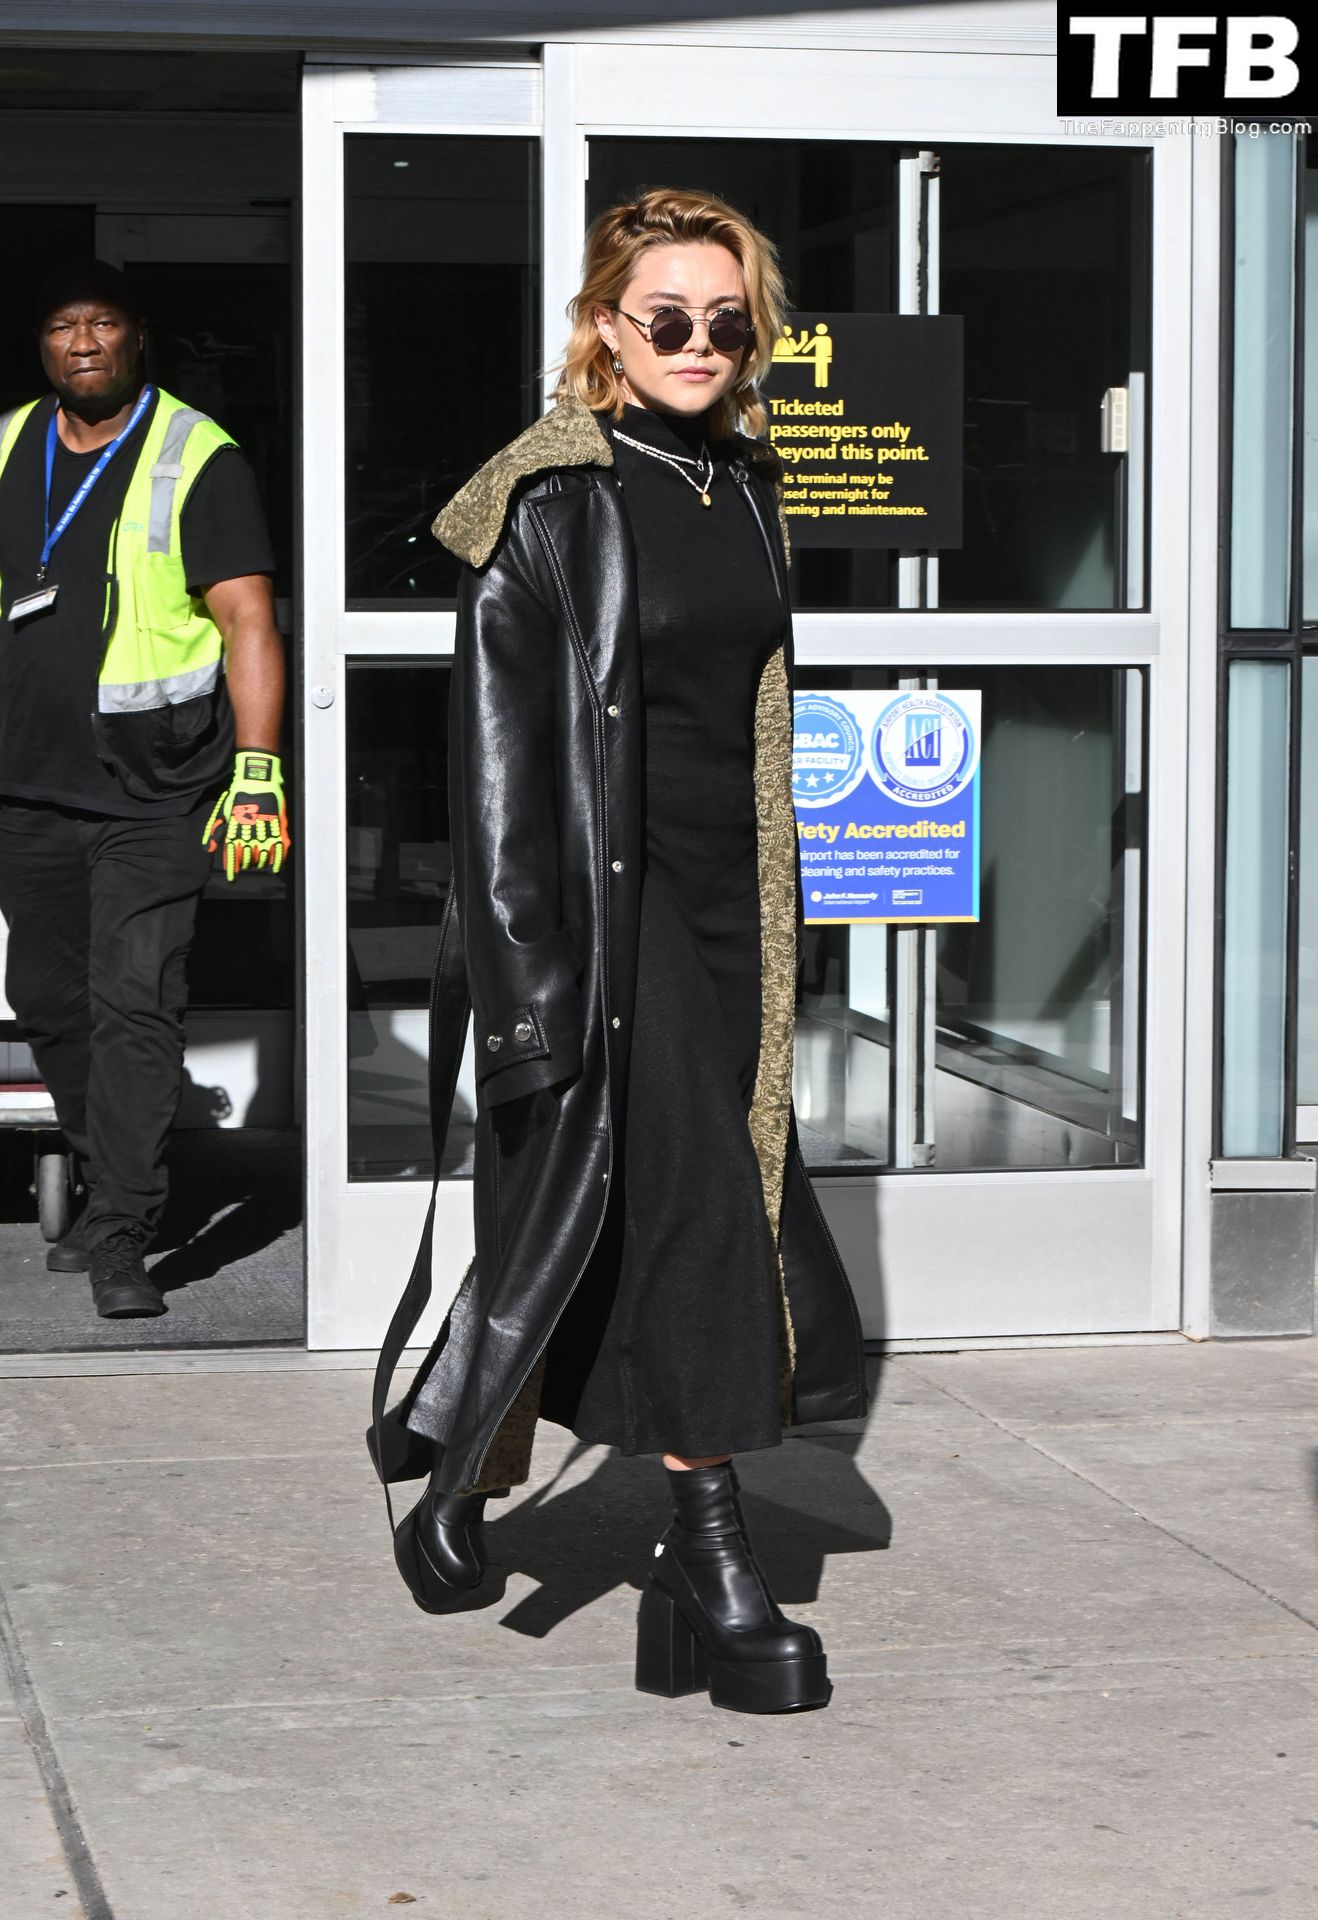 Florence Pugh Pokies The Fappening Blog 2 - Florence Pugh Shows Off Her Pokies at JFK airport in NYC (31 Photos)